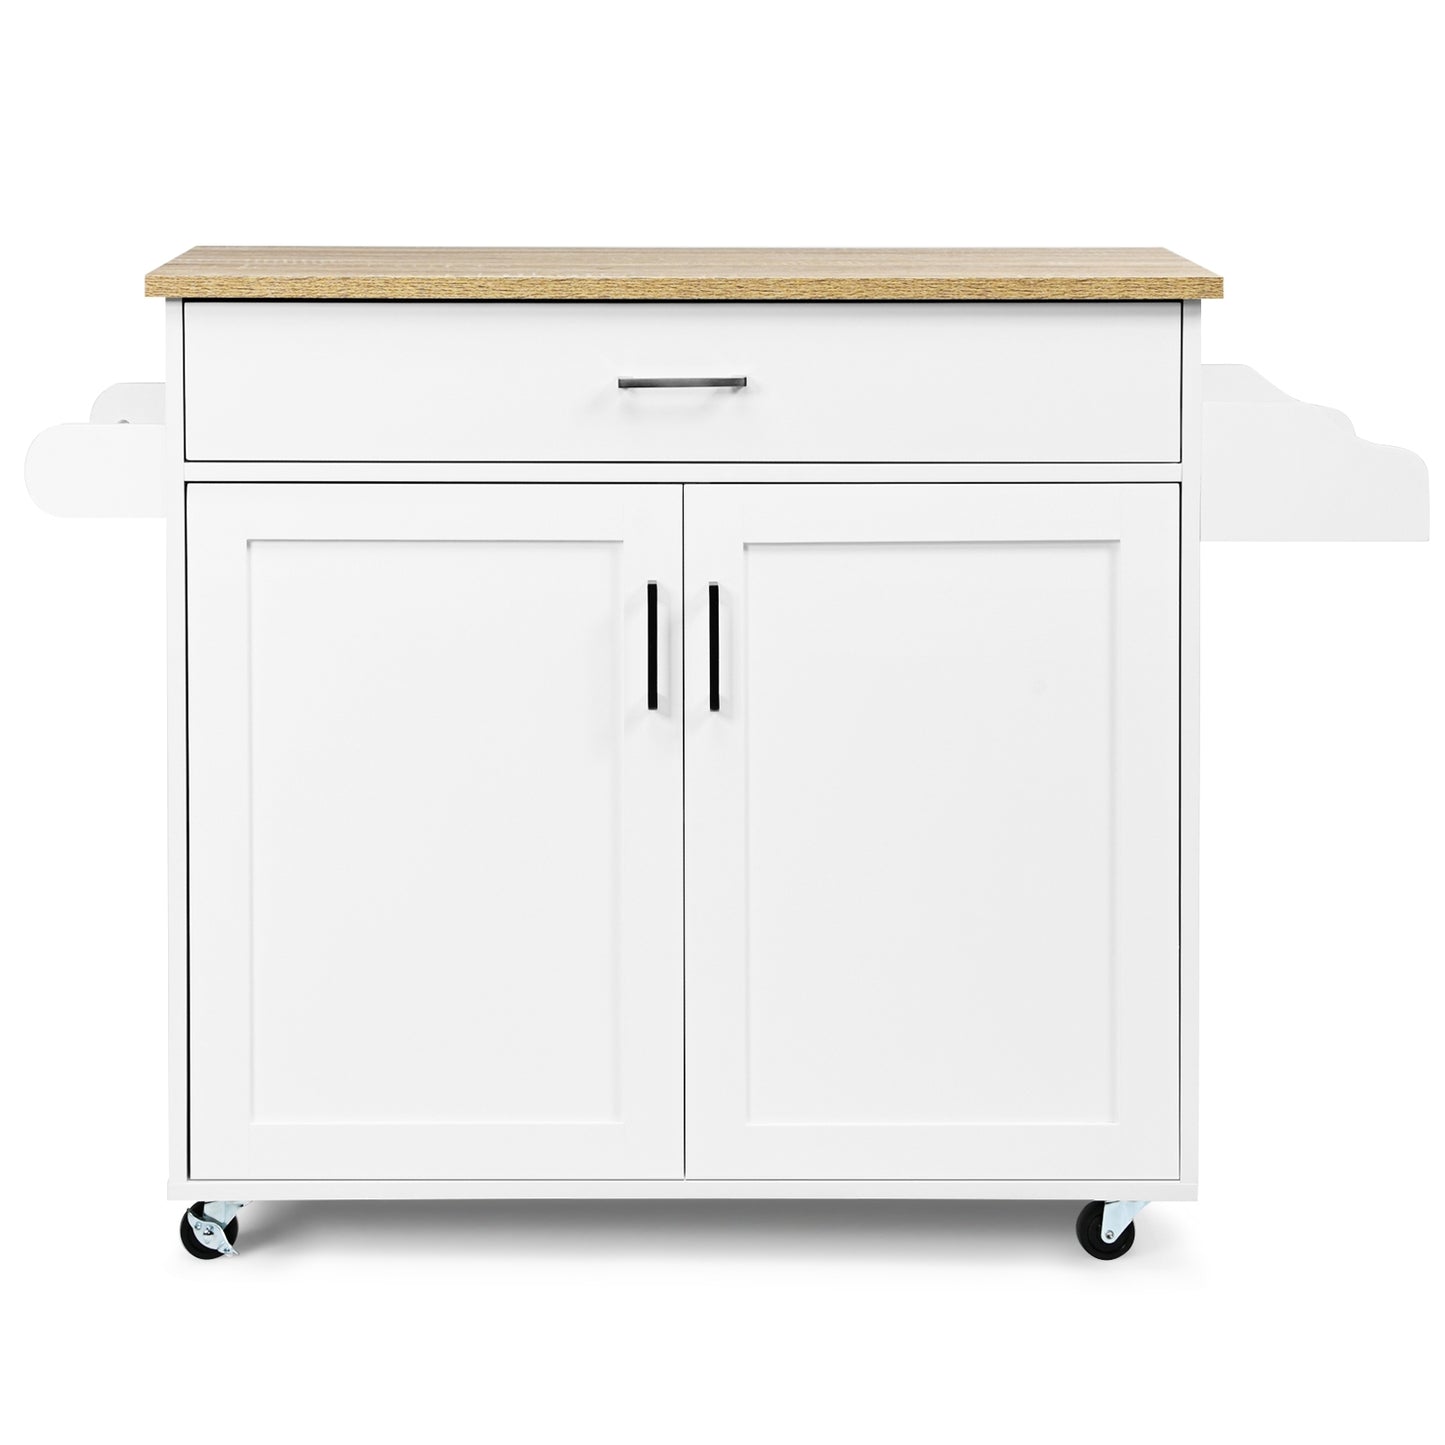 Rolling Kitchen Island Cart with Towel and Spice Rack-White